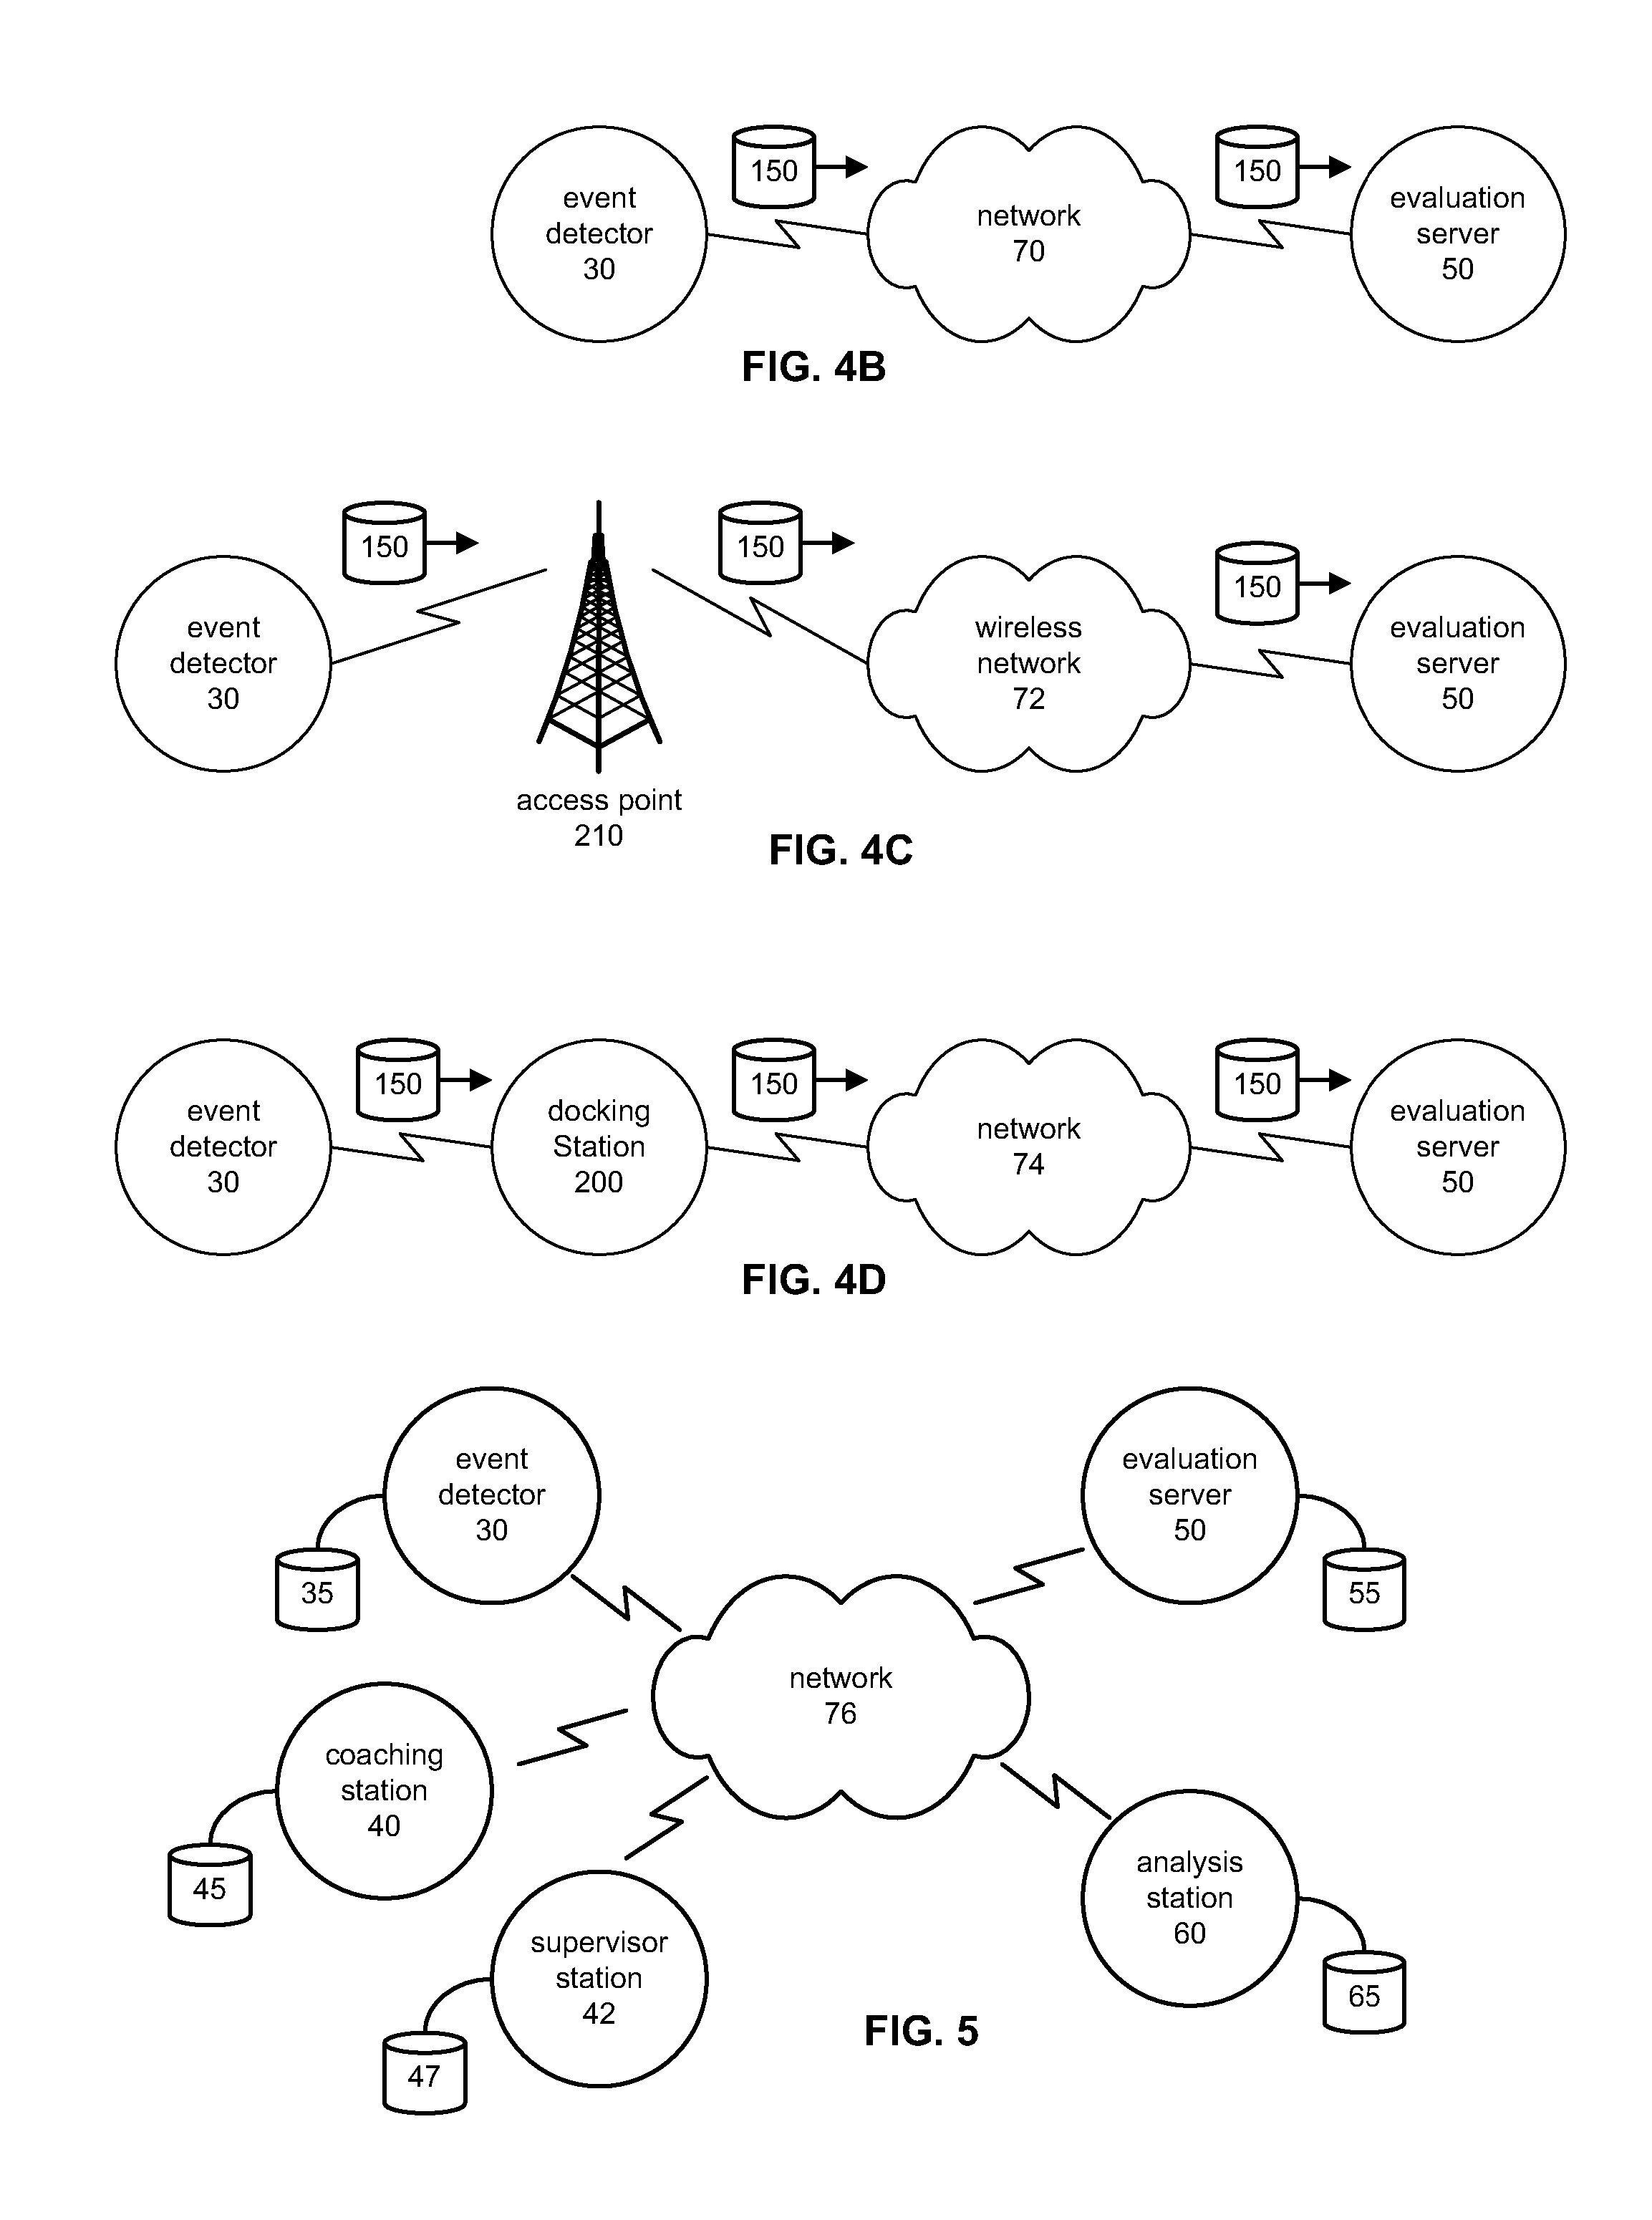 System and Method for Reducing Driving Risk With Hindsignt